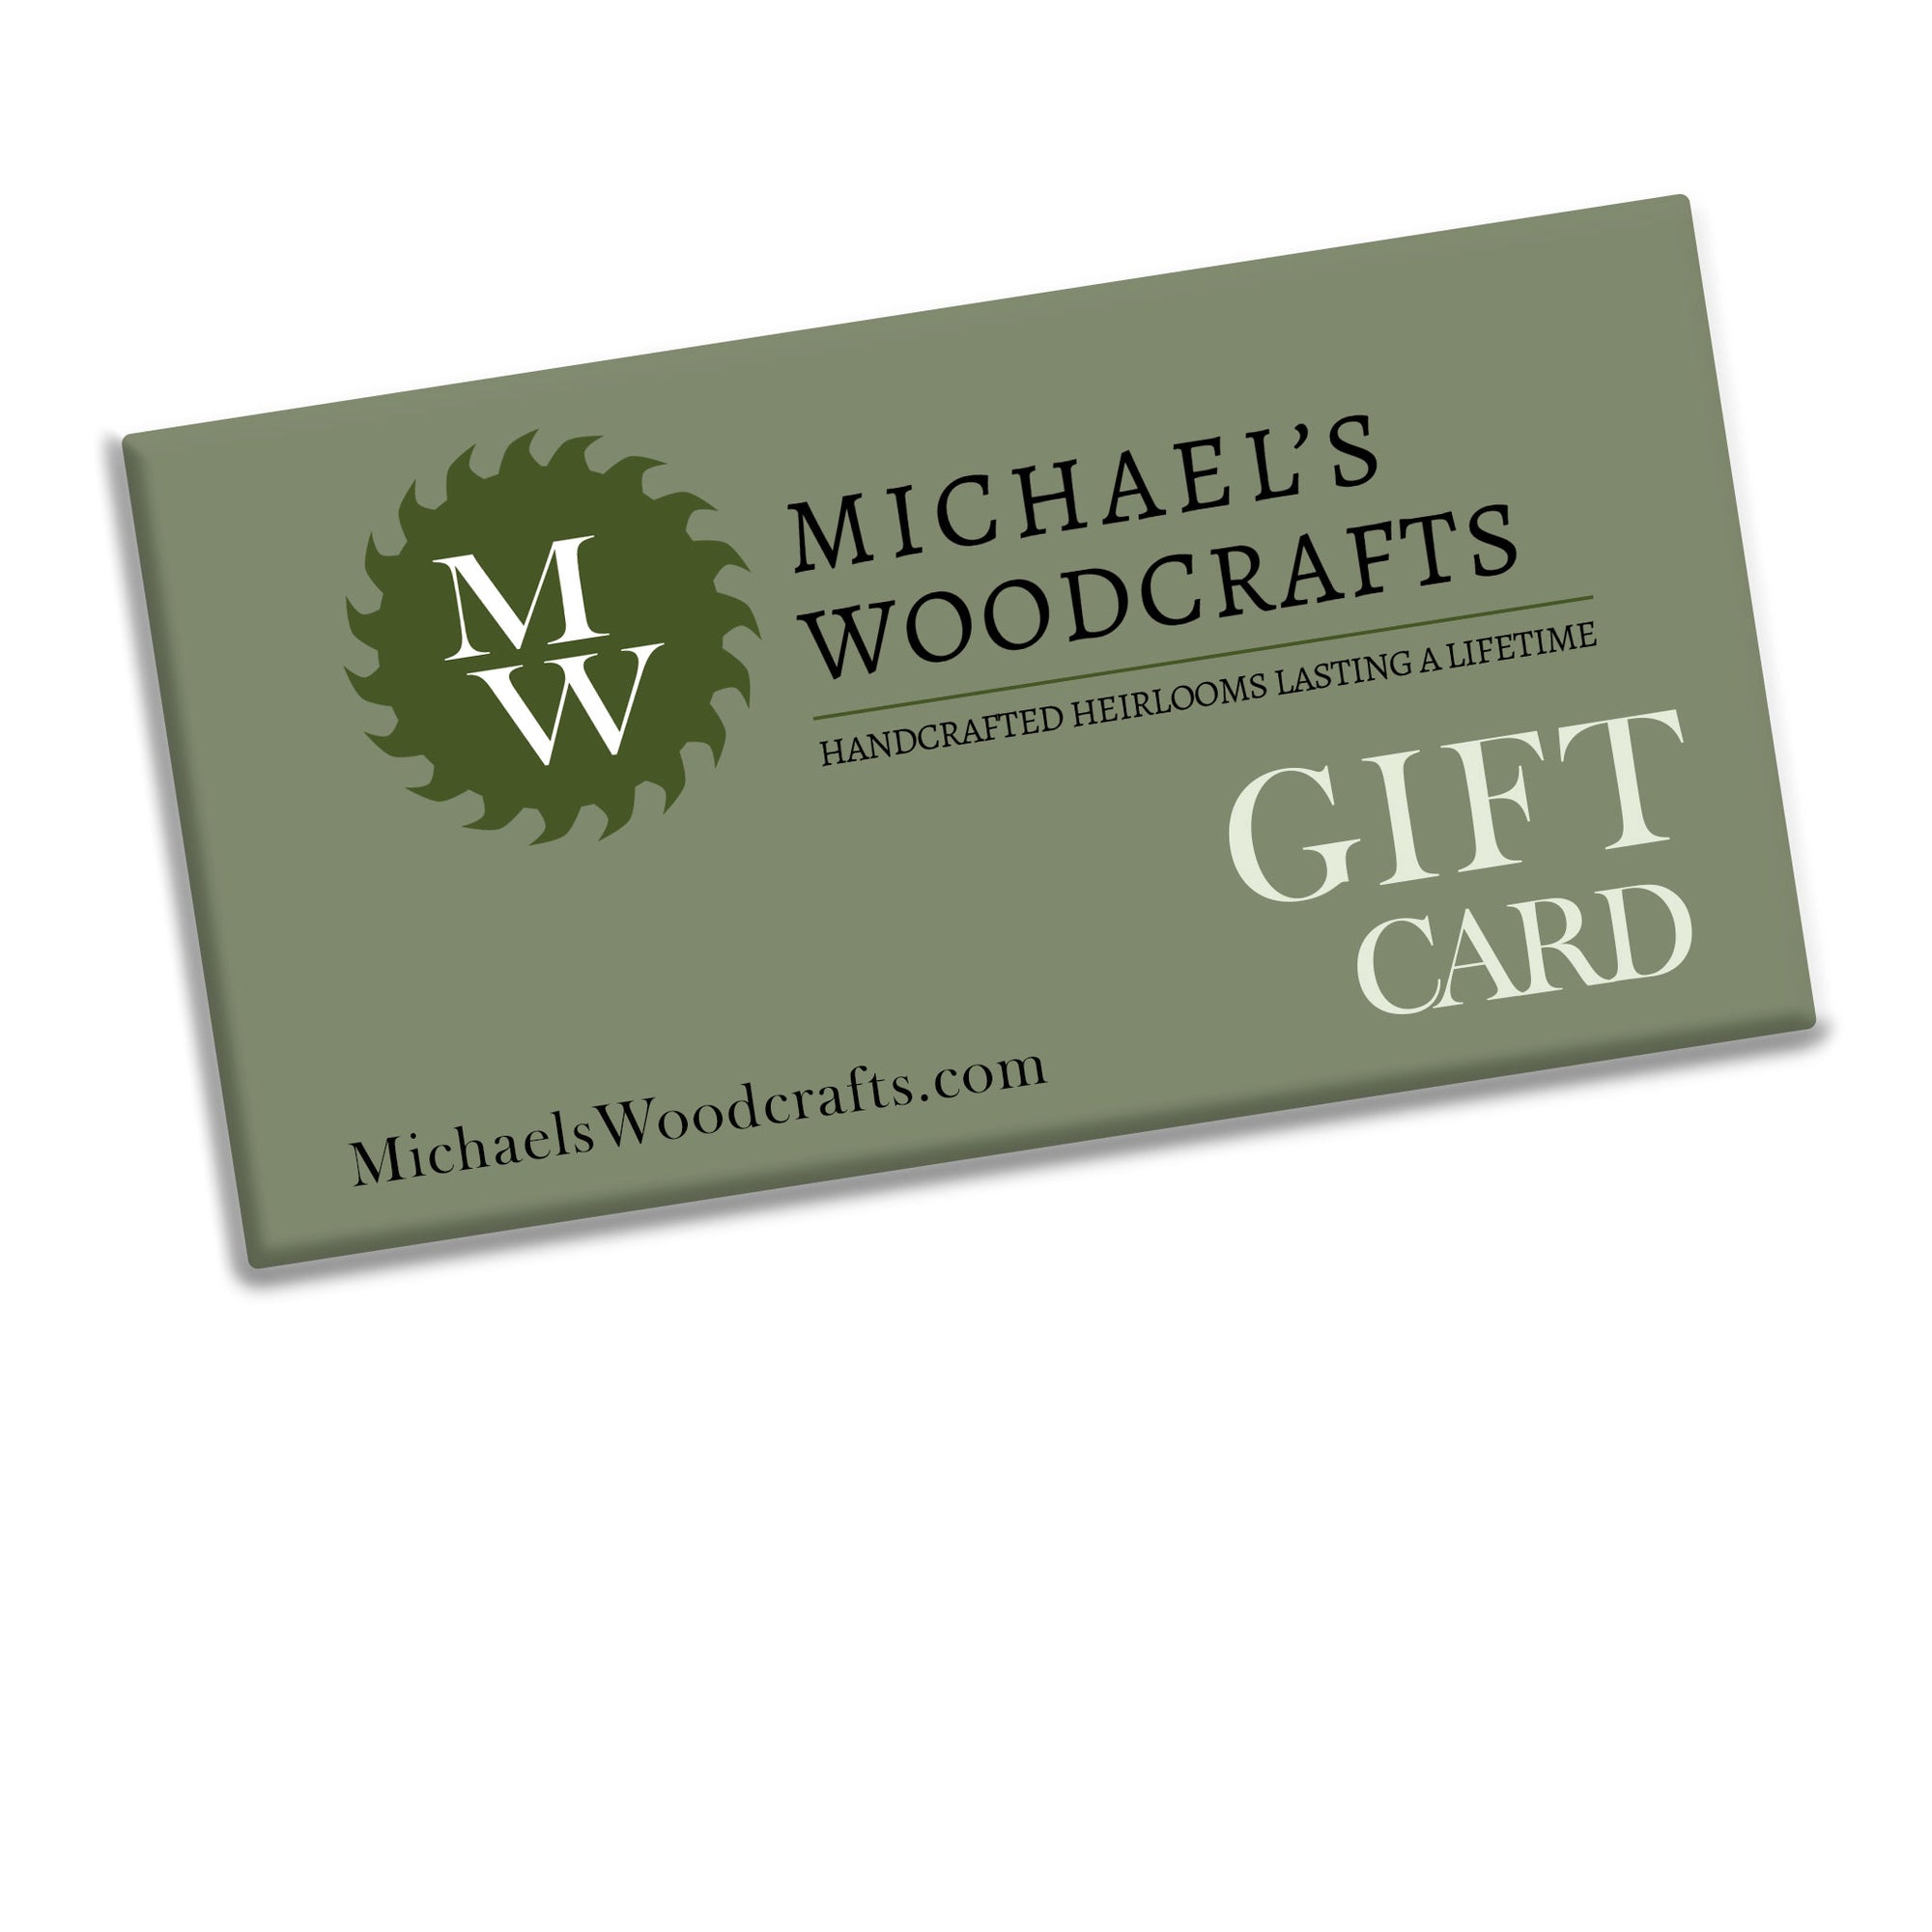 Gift card to michaelswoodcrafts.com